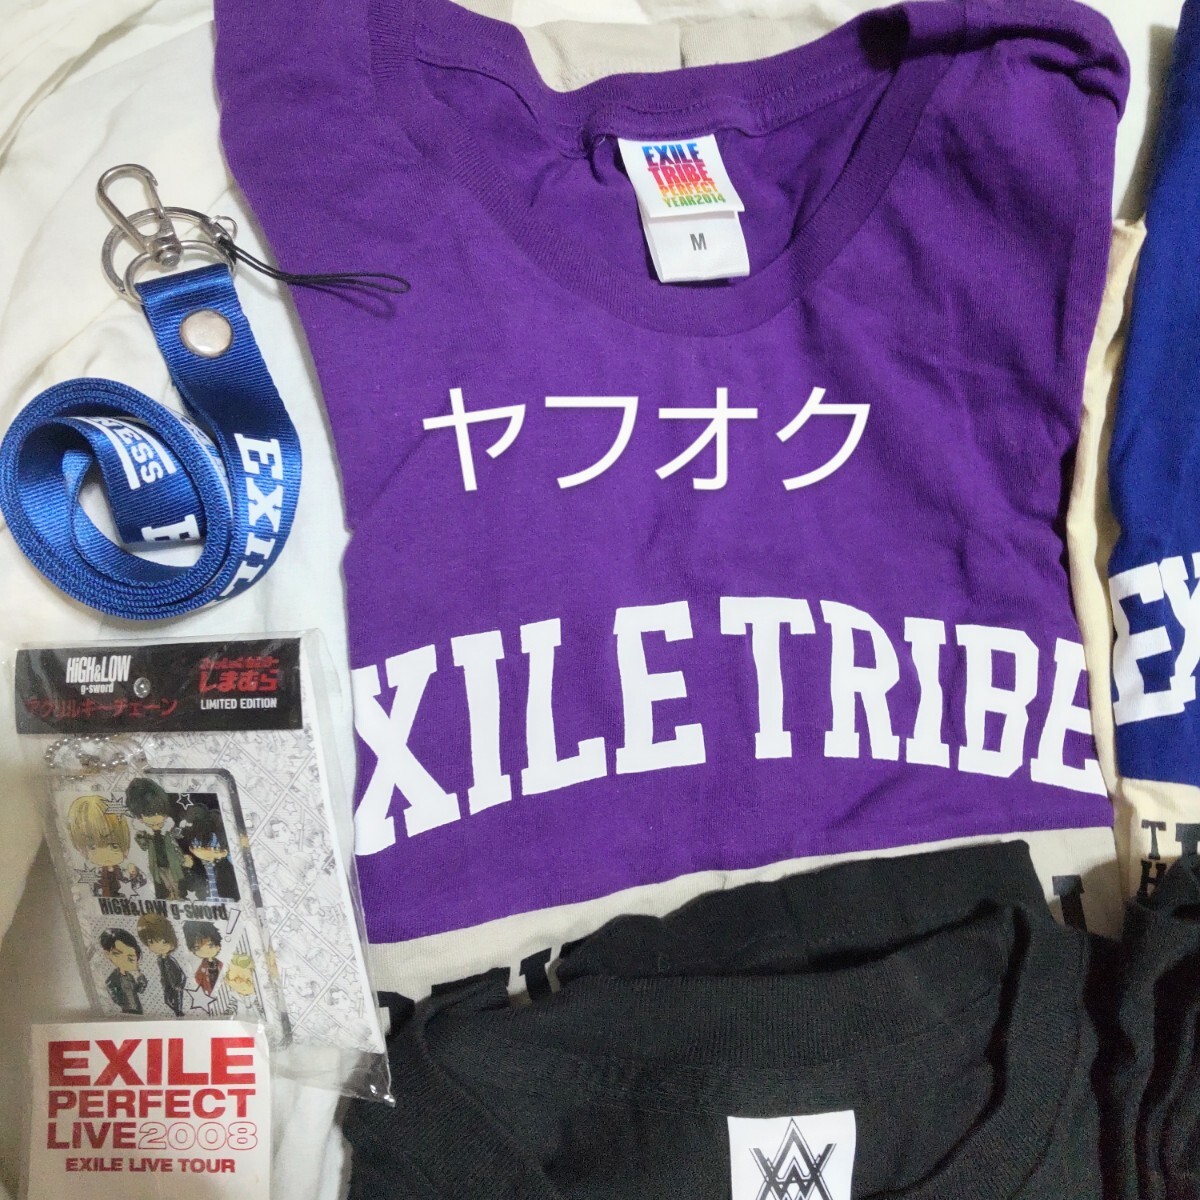 EXILE ネックストラップ、EXILE TRIBE PERFECT YEAR LIVE TOUR TOWER OF WISH2014、EXILE LIVE TOUR2015 AMAZING WORLD Tシャツ　等 セット_画像2